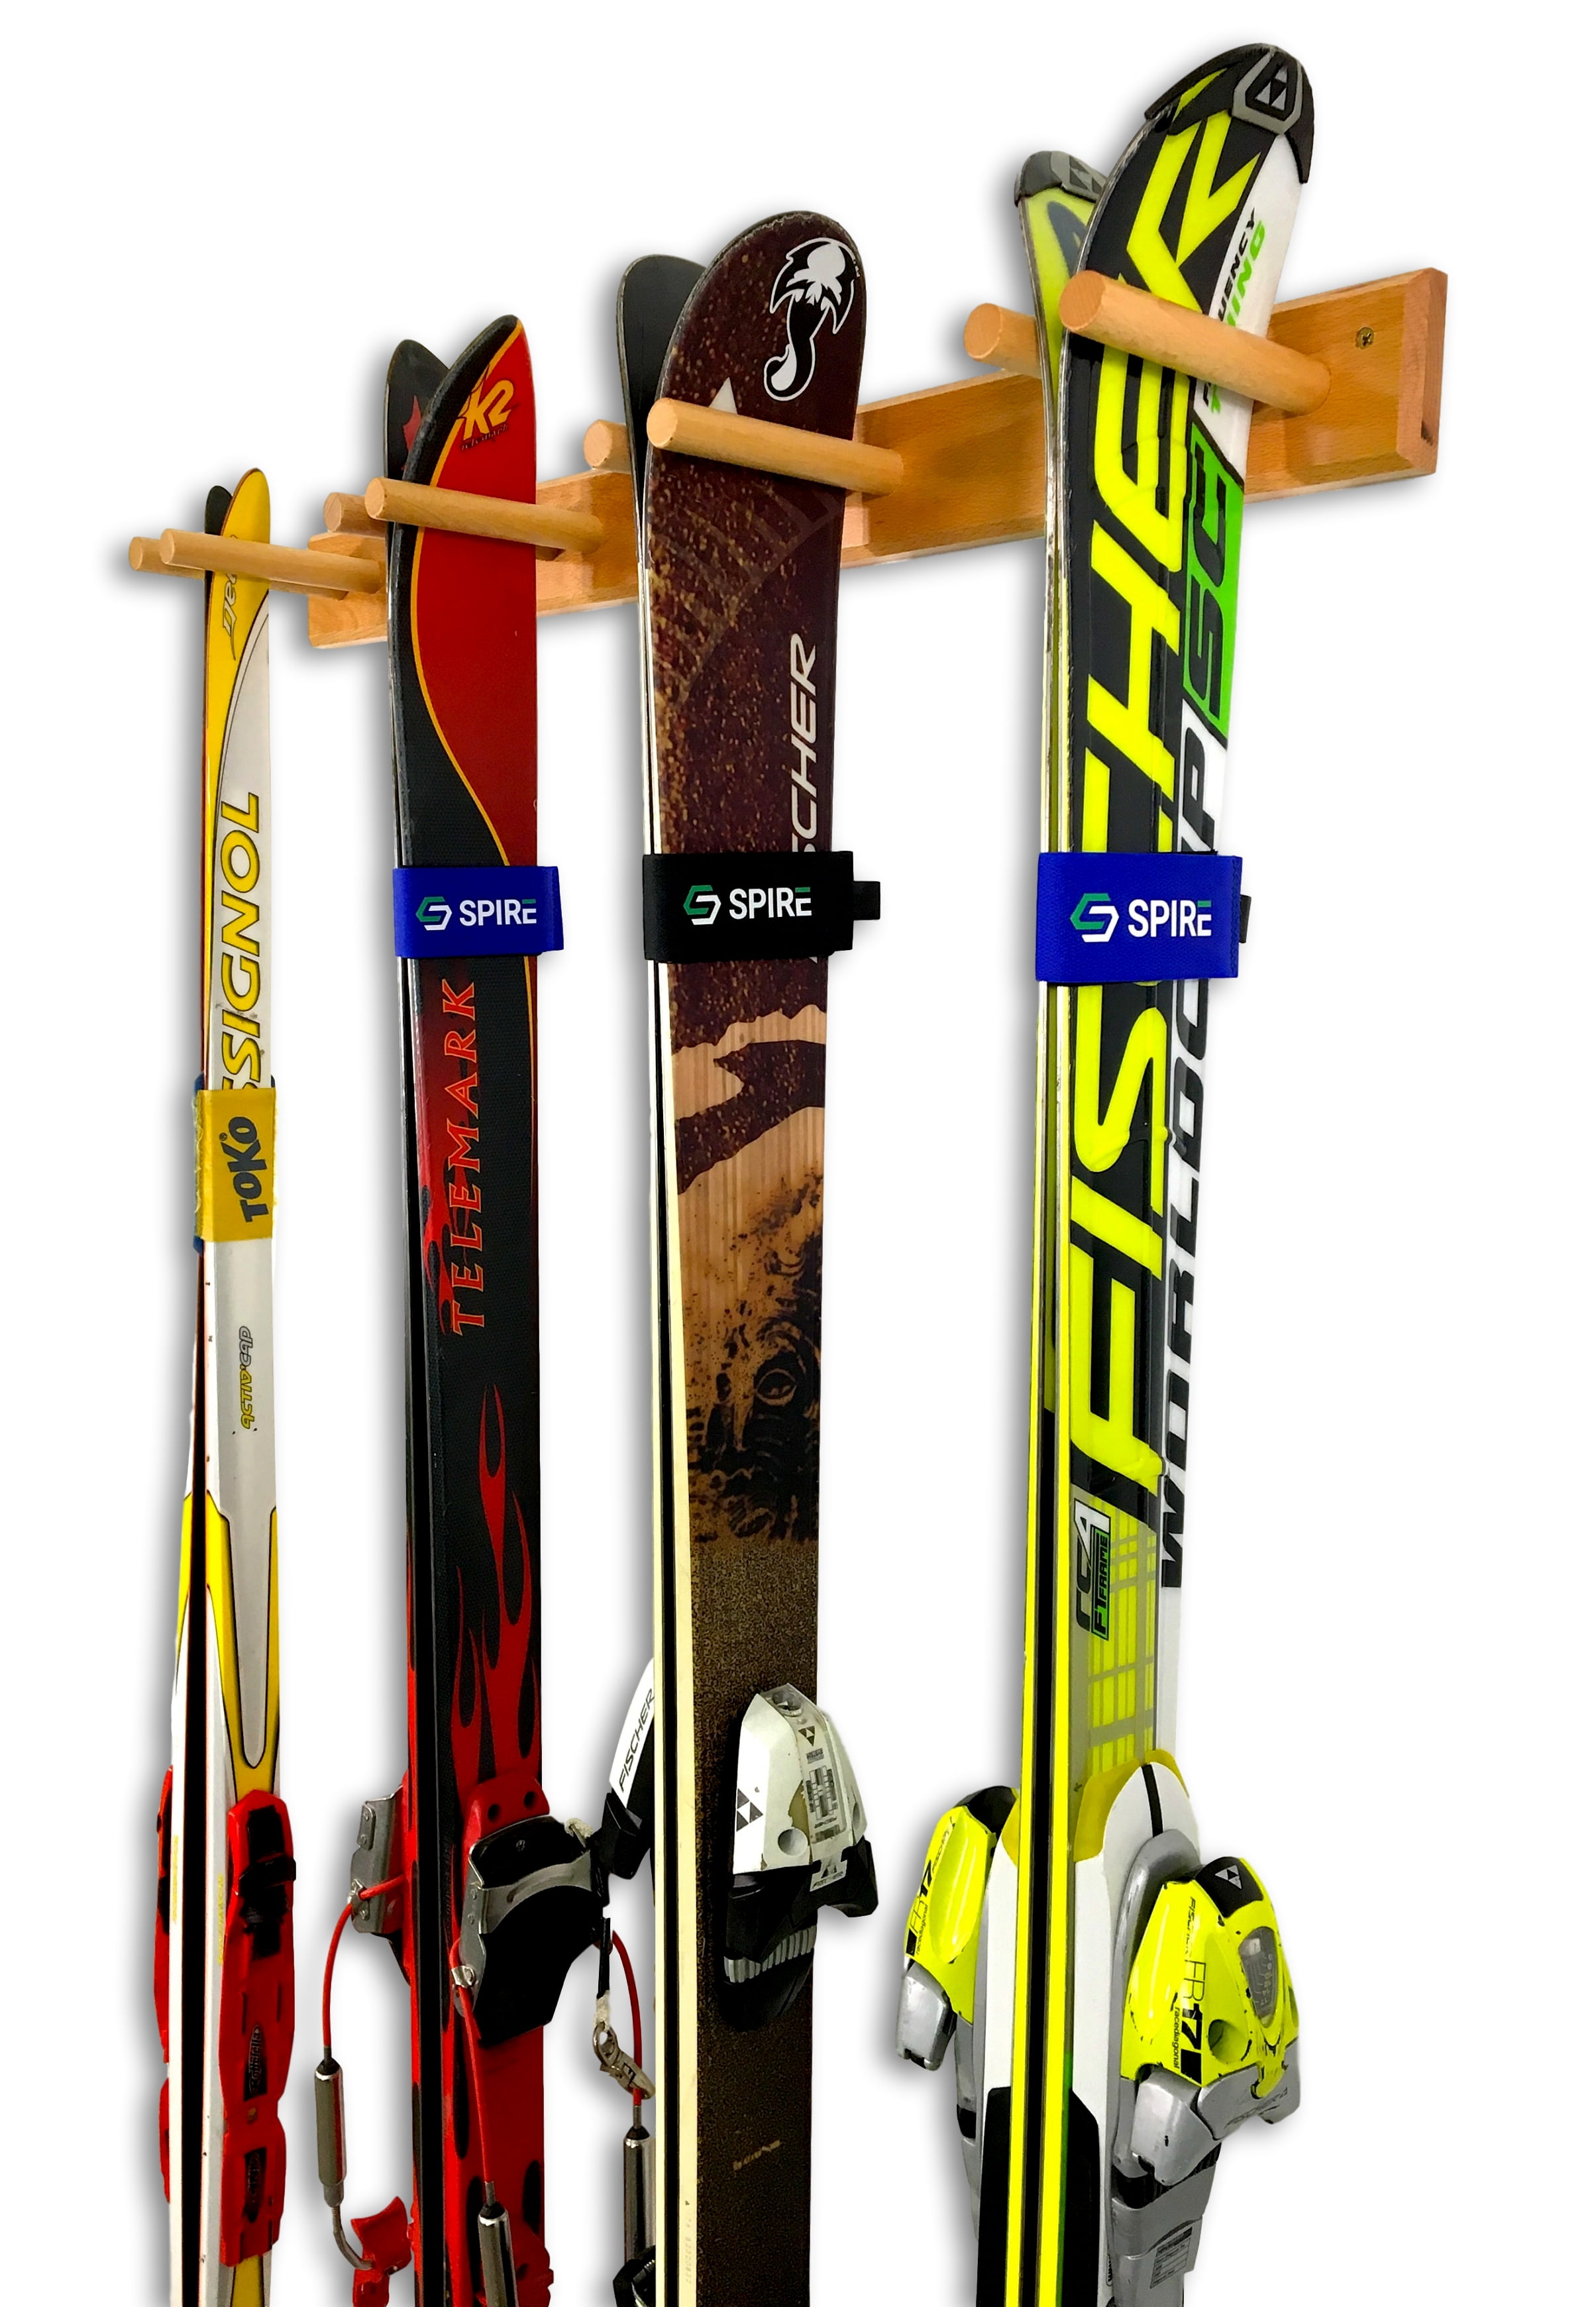 Ski Wall Rack,Holds 12 Pairs Skis Home and Garage Skiing Storage Mount Hold 